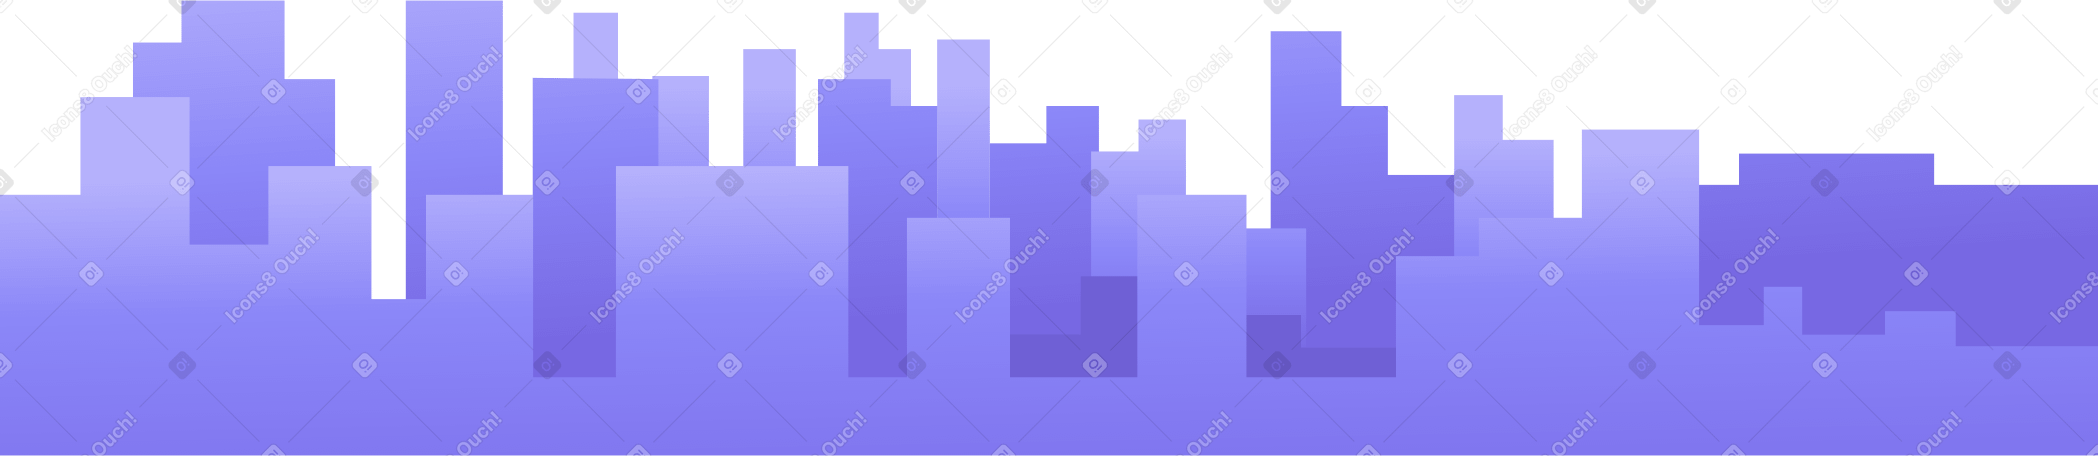 silhouette of city houses at night Illustration in PNG, SVG